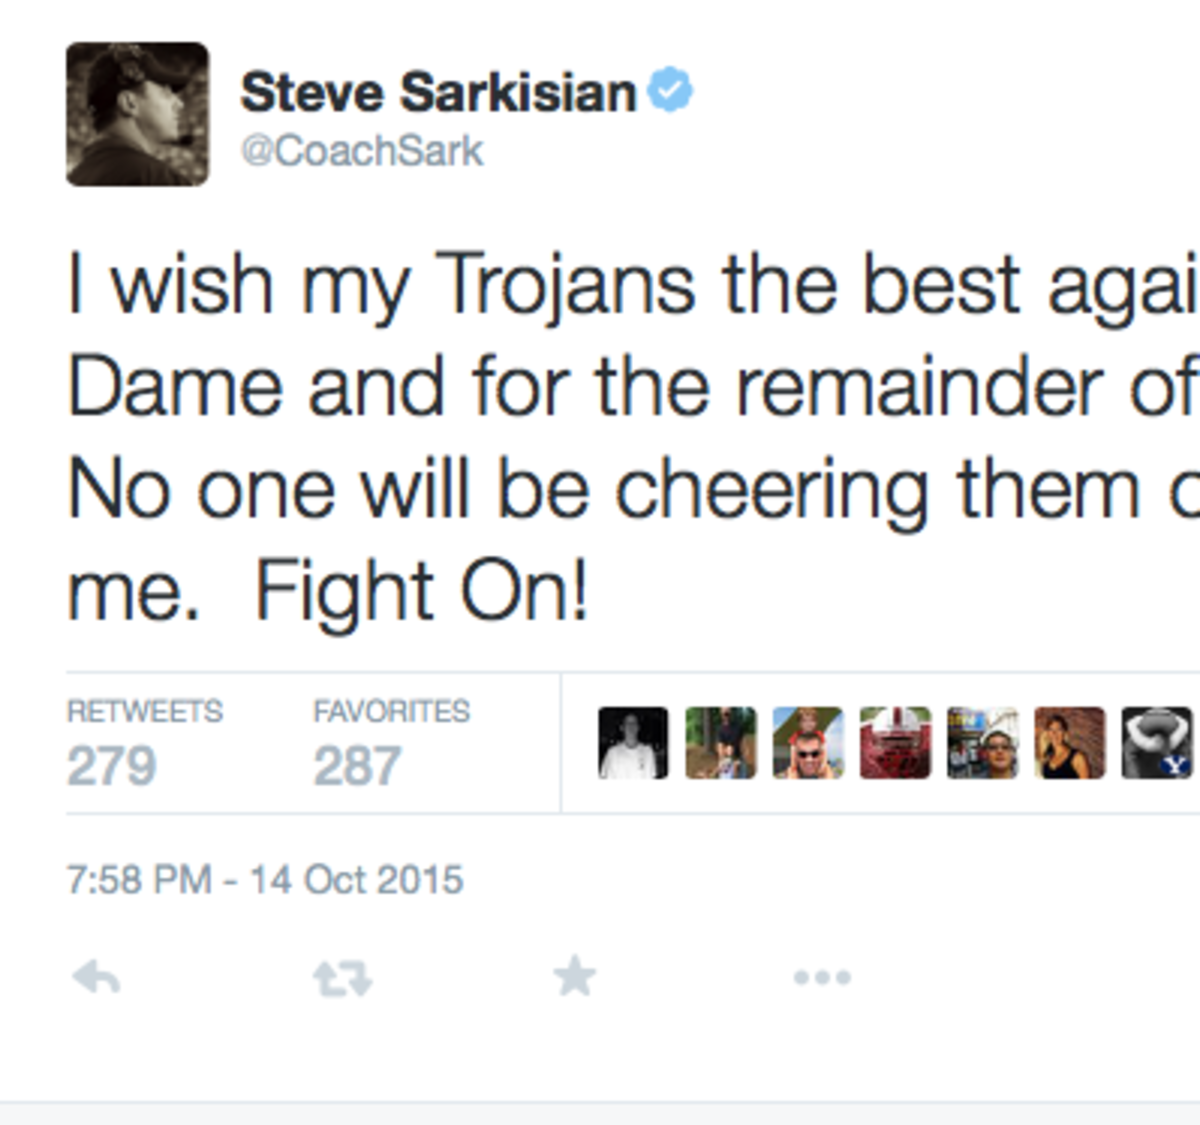 Steve Sarkisian tweets about recently being fired from USC.